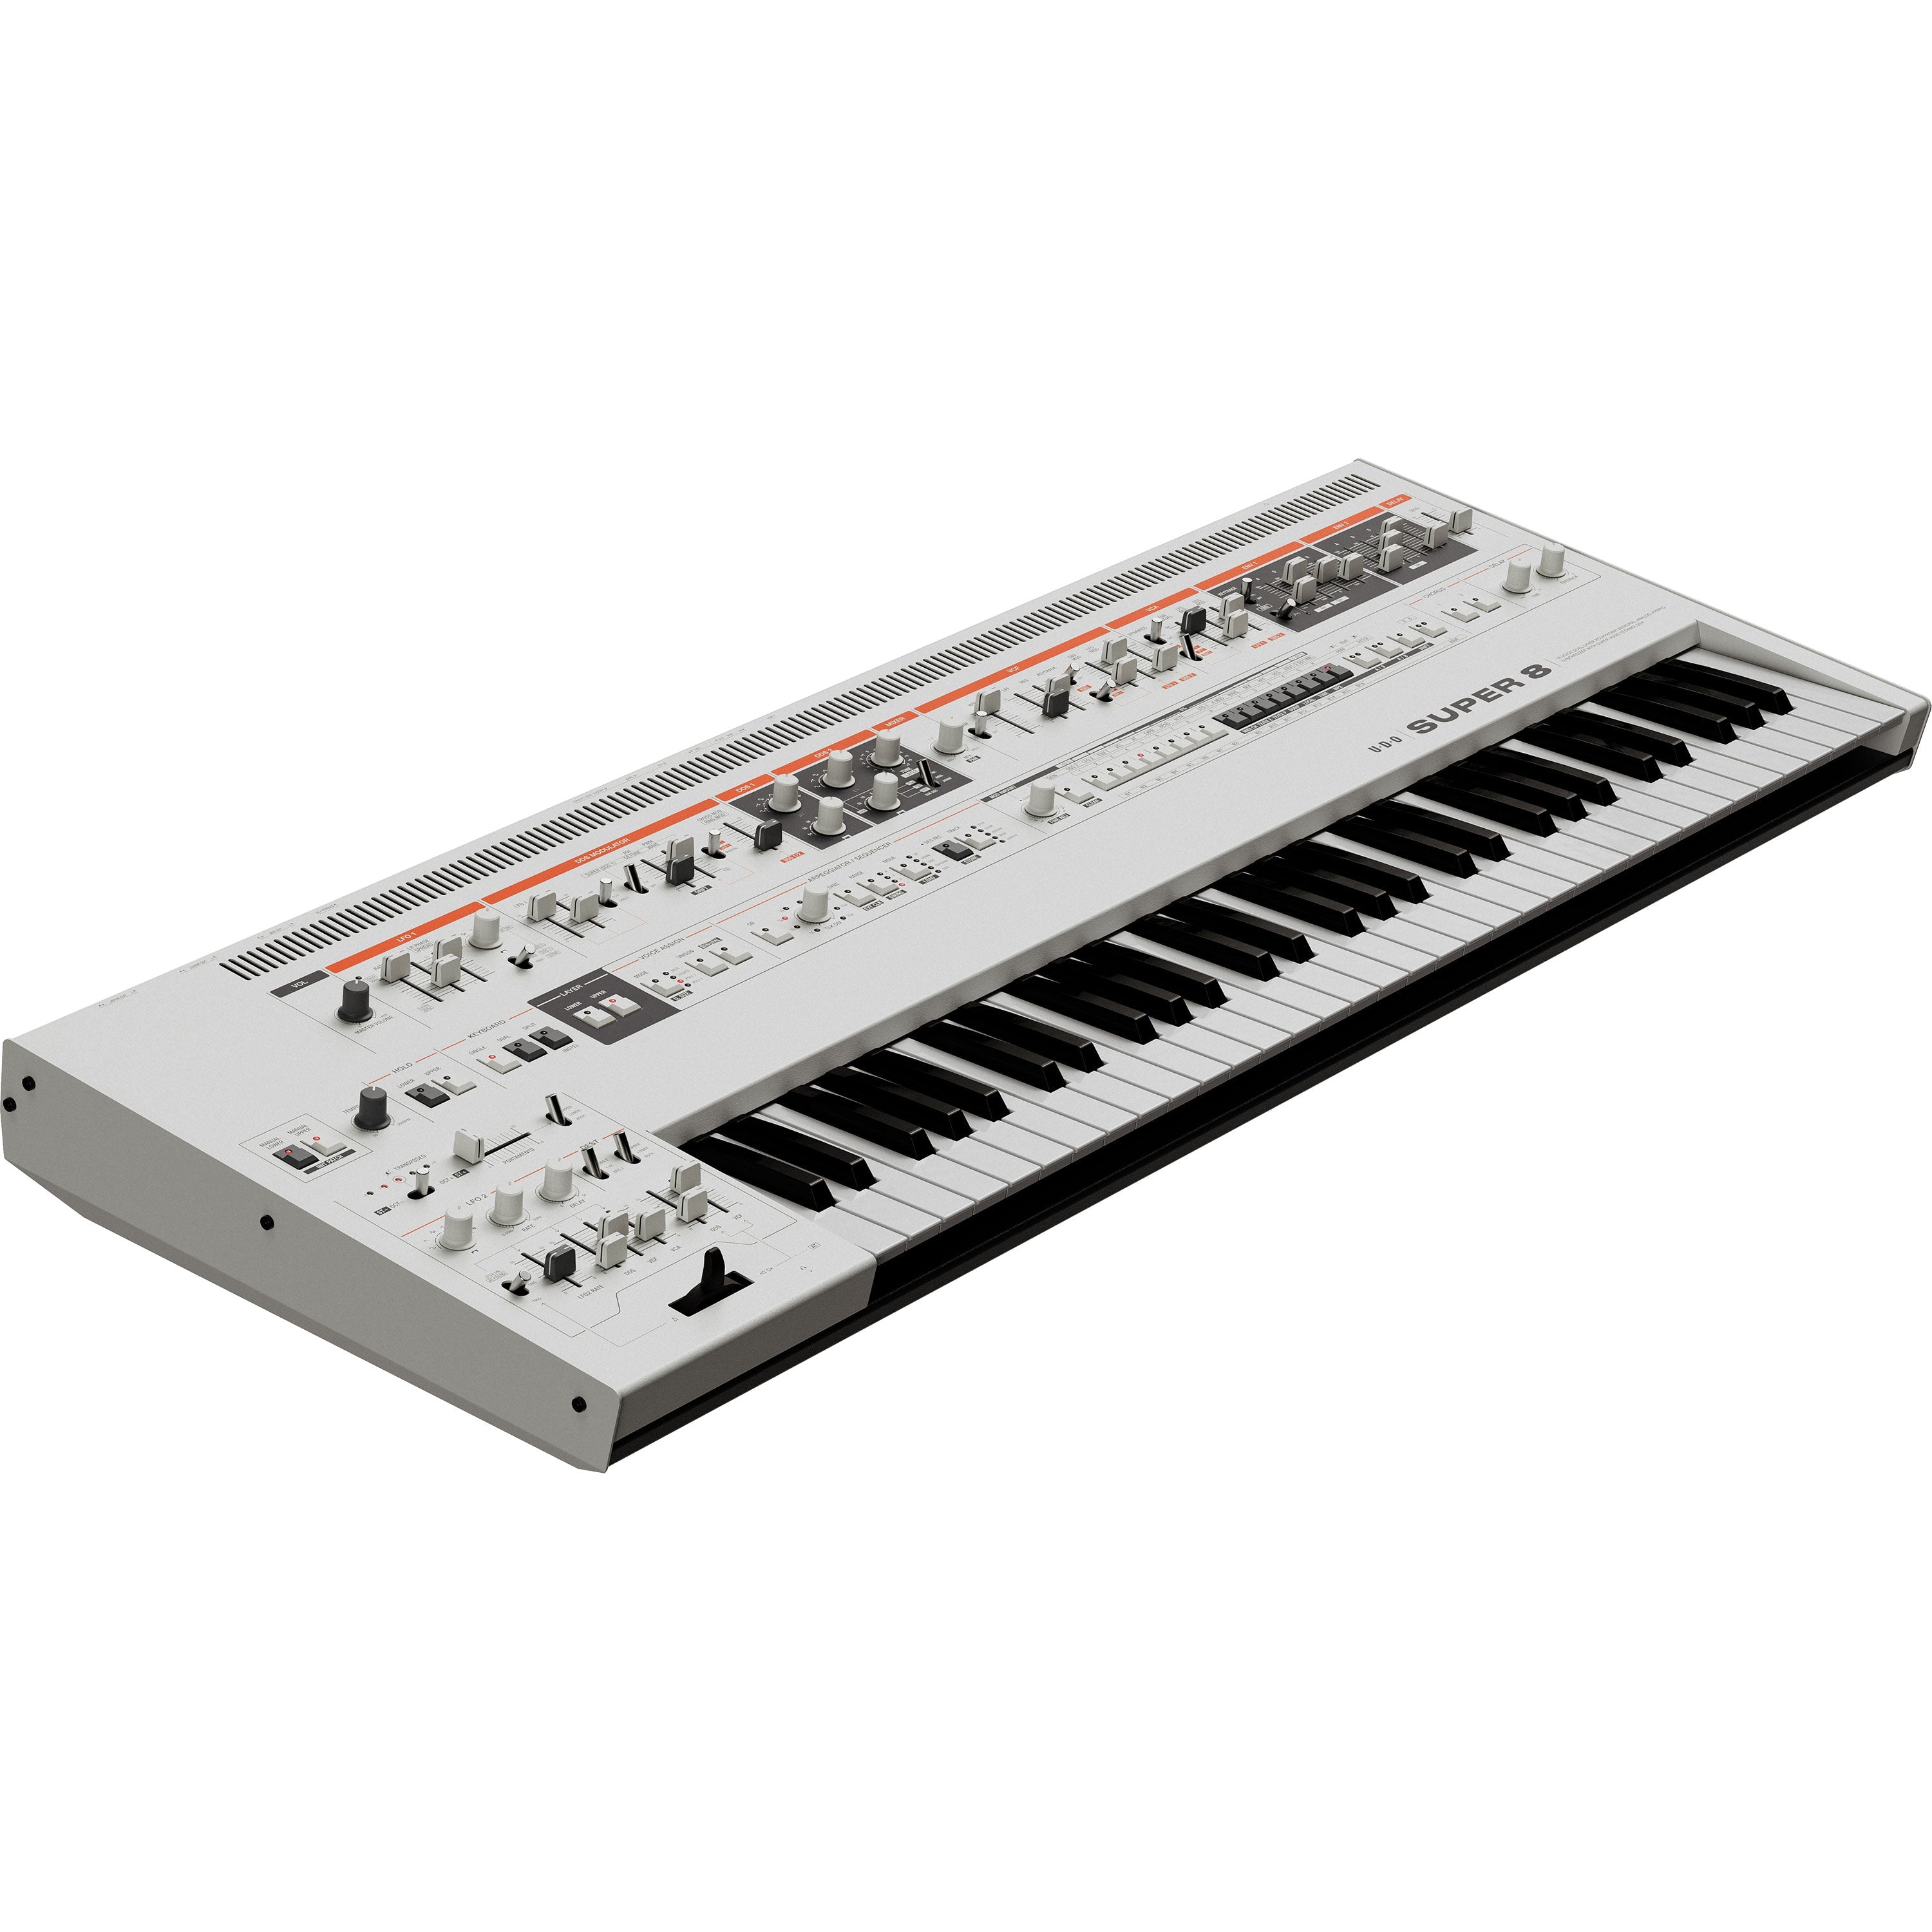 UDO Audio Super 8 16-Voice Bi-Timbral Keyboard Synthesizer - White CABLE KIT